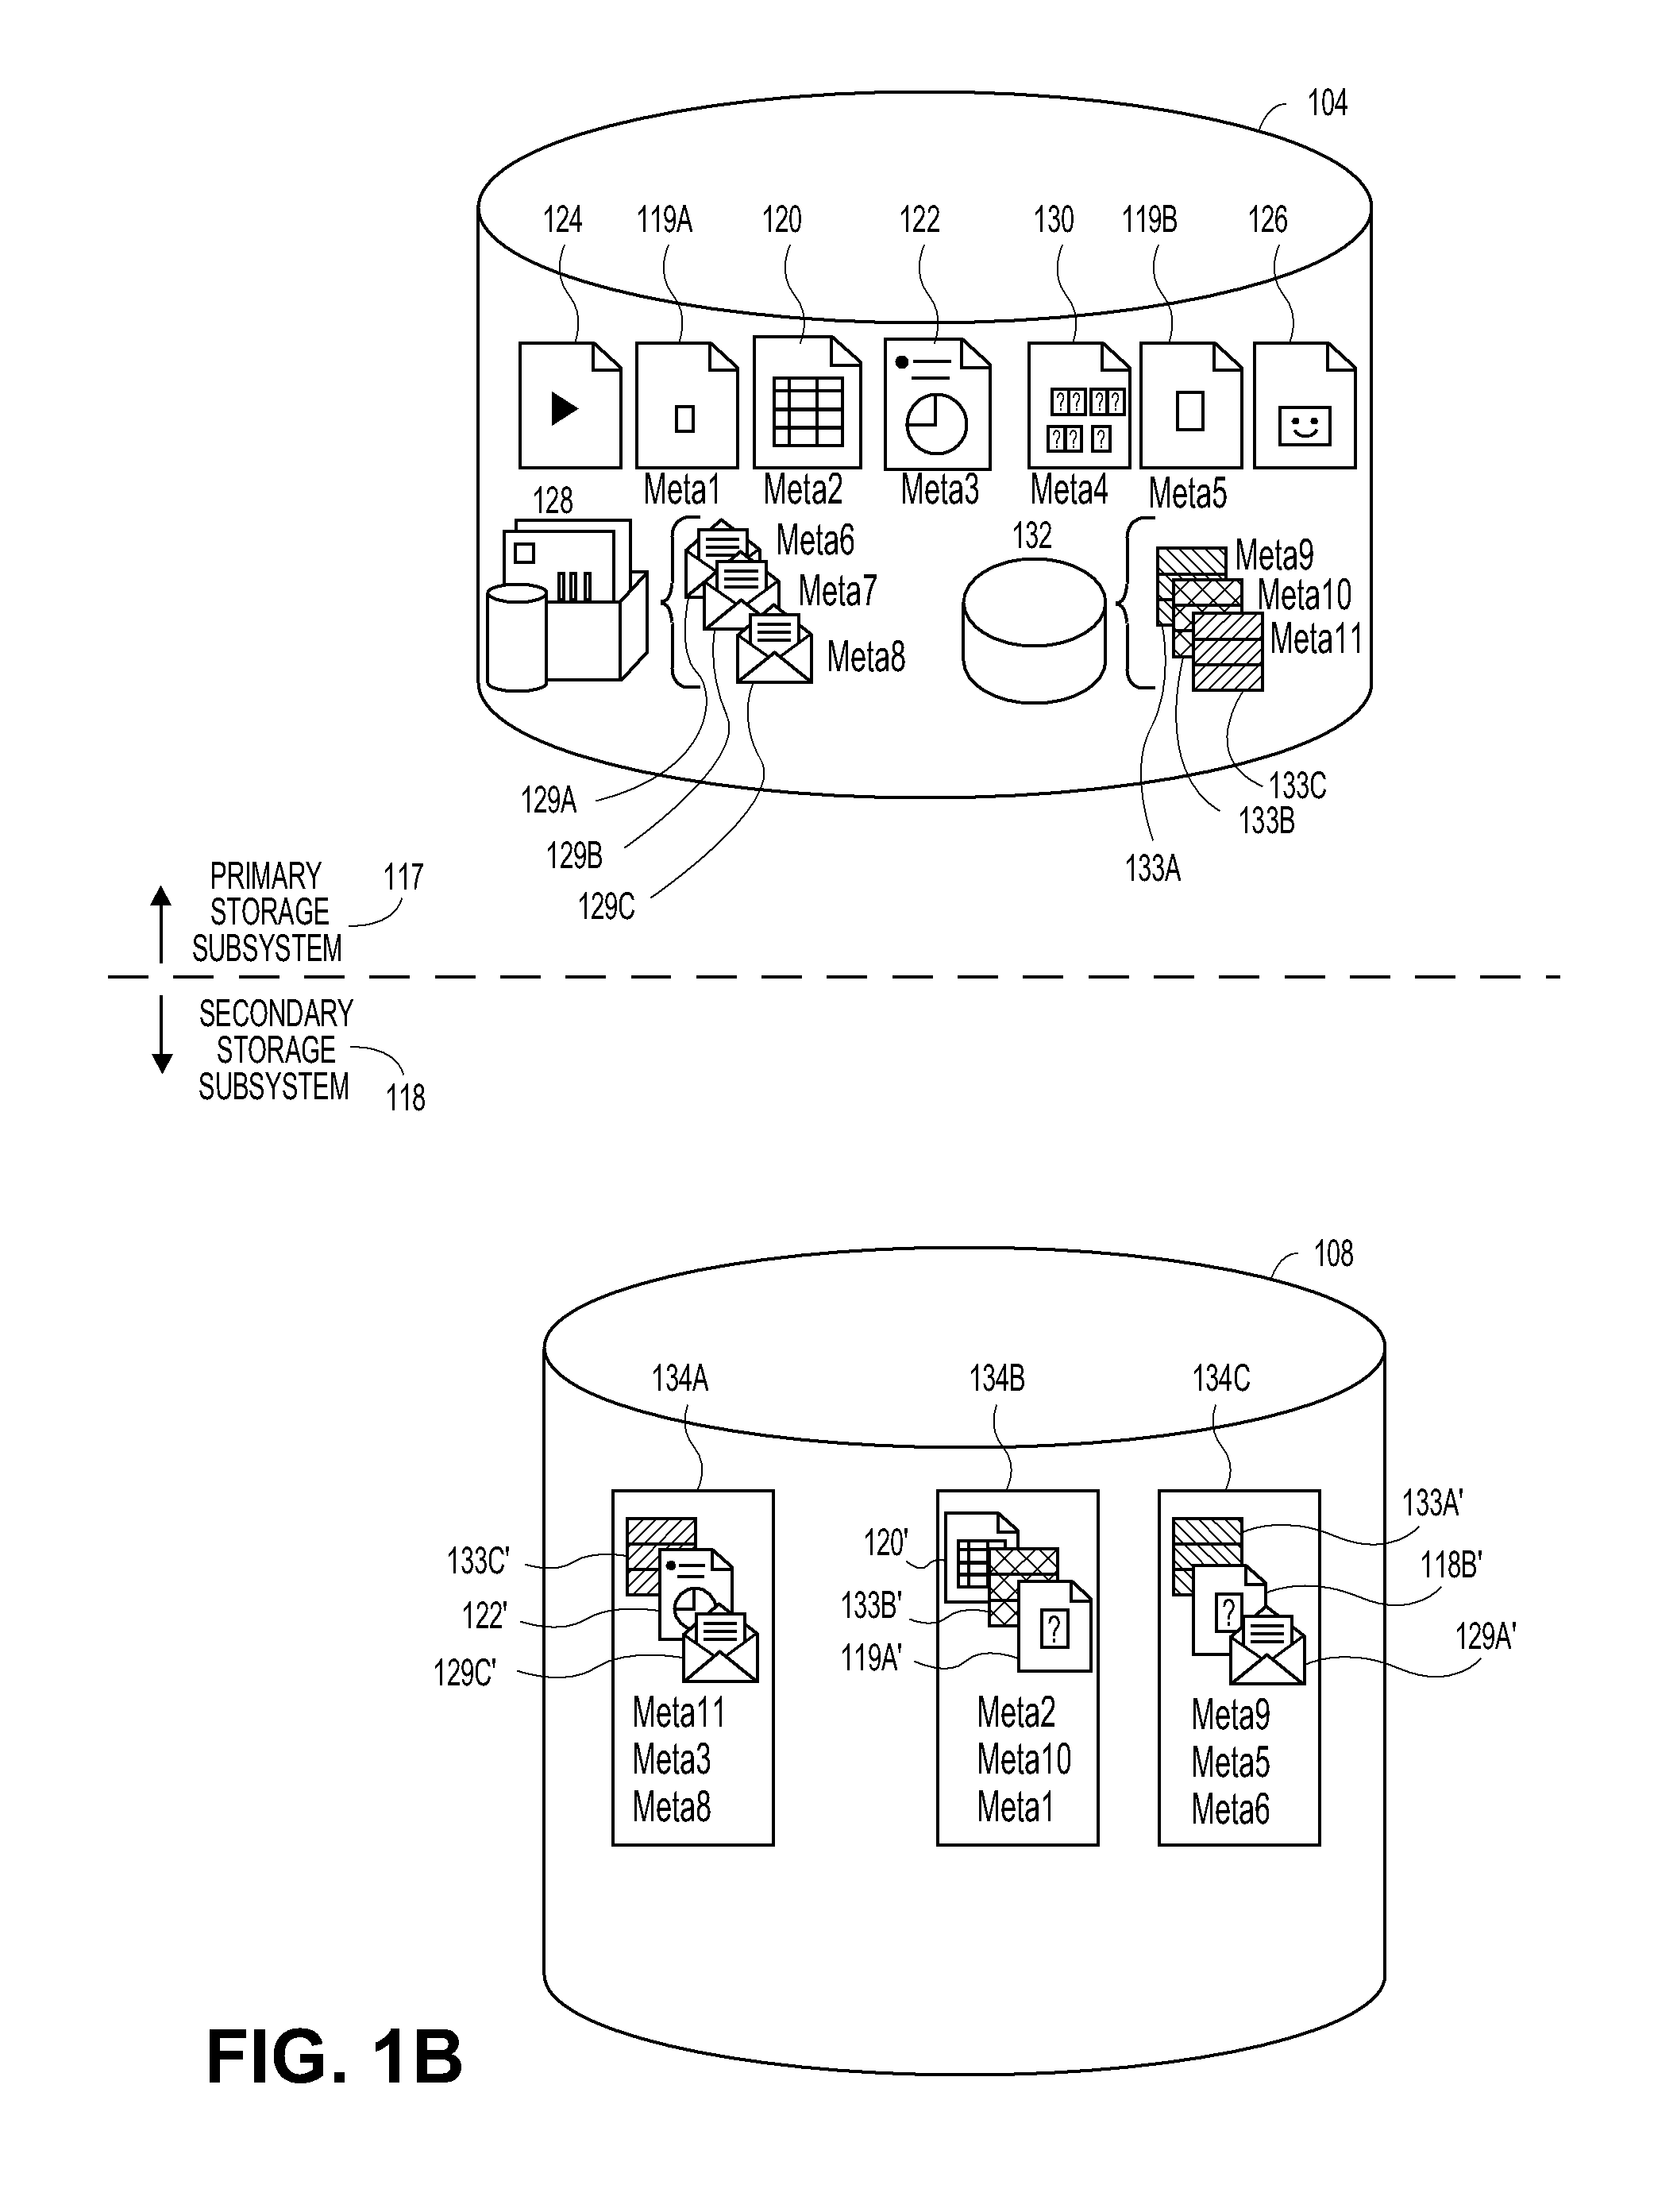 Systems and methods for rule-based virtual machine data protection